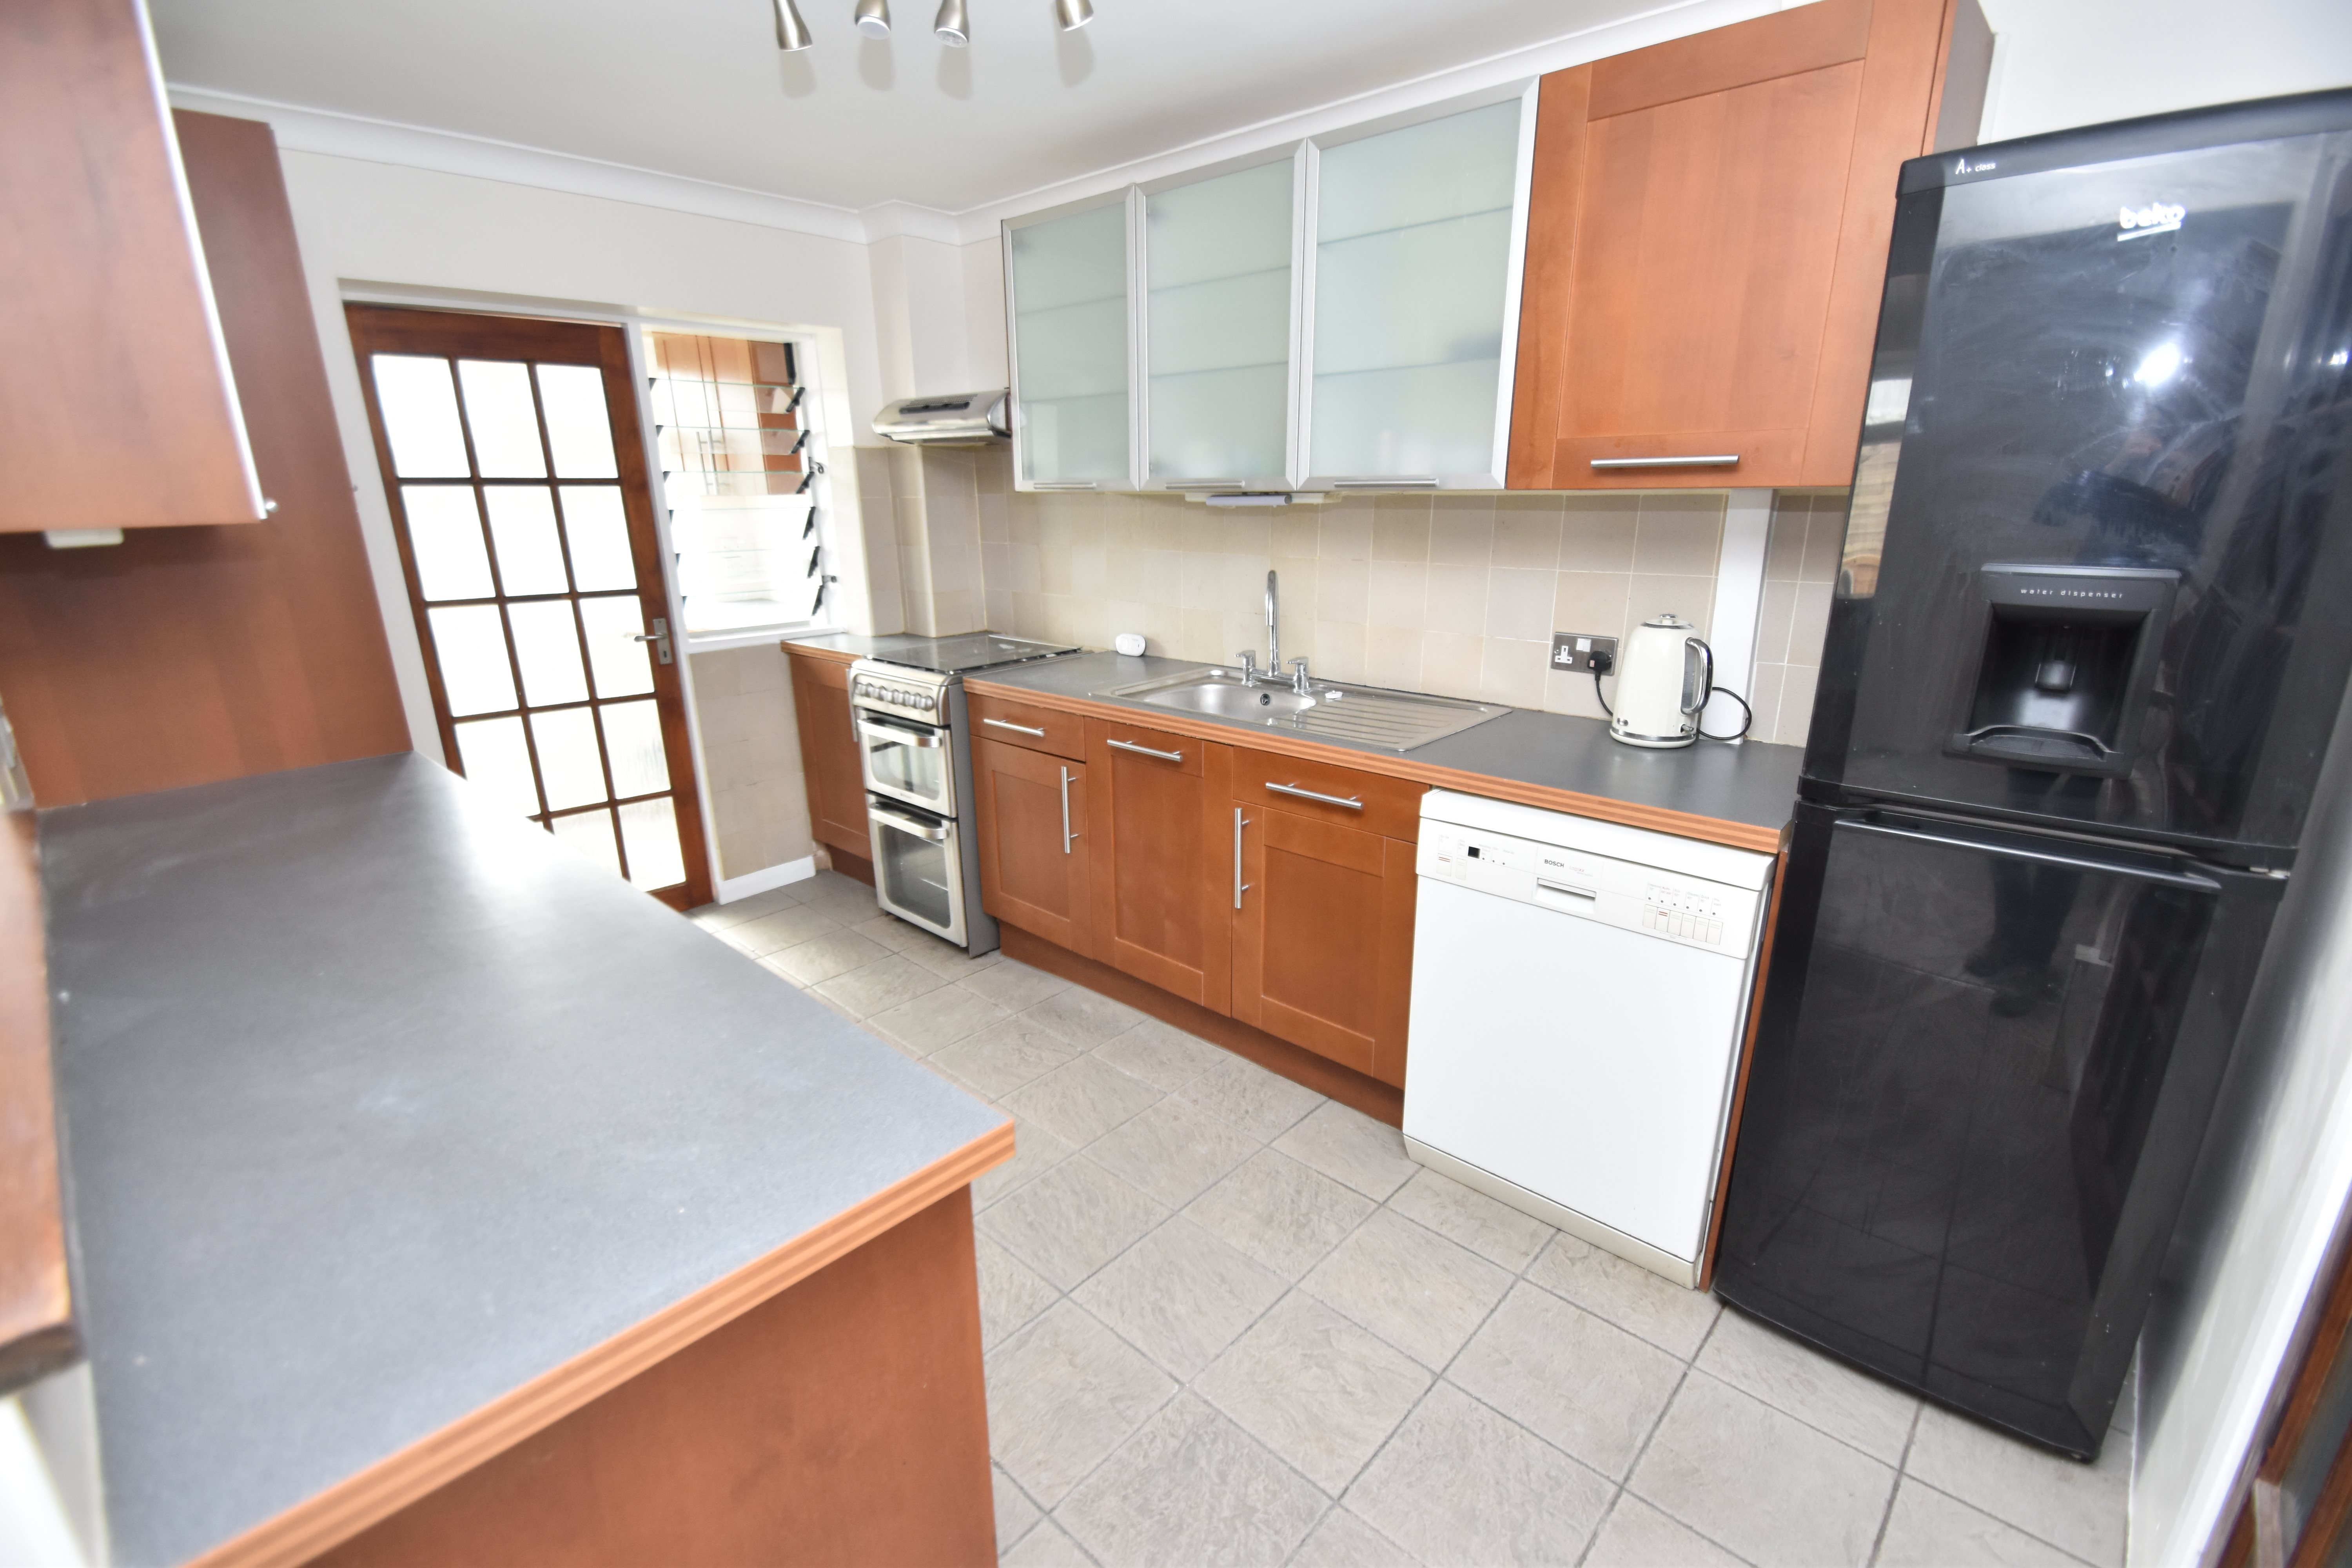 3 bed house to rent in Queenwood, Penylan  - Property Image 7